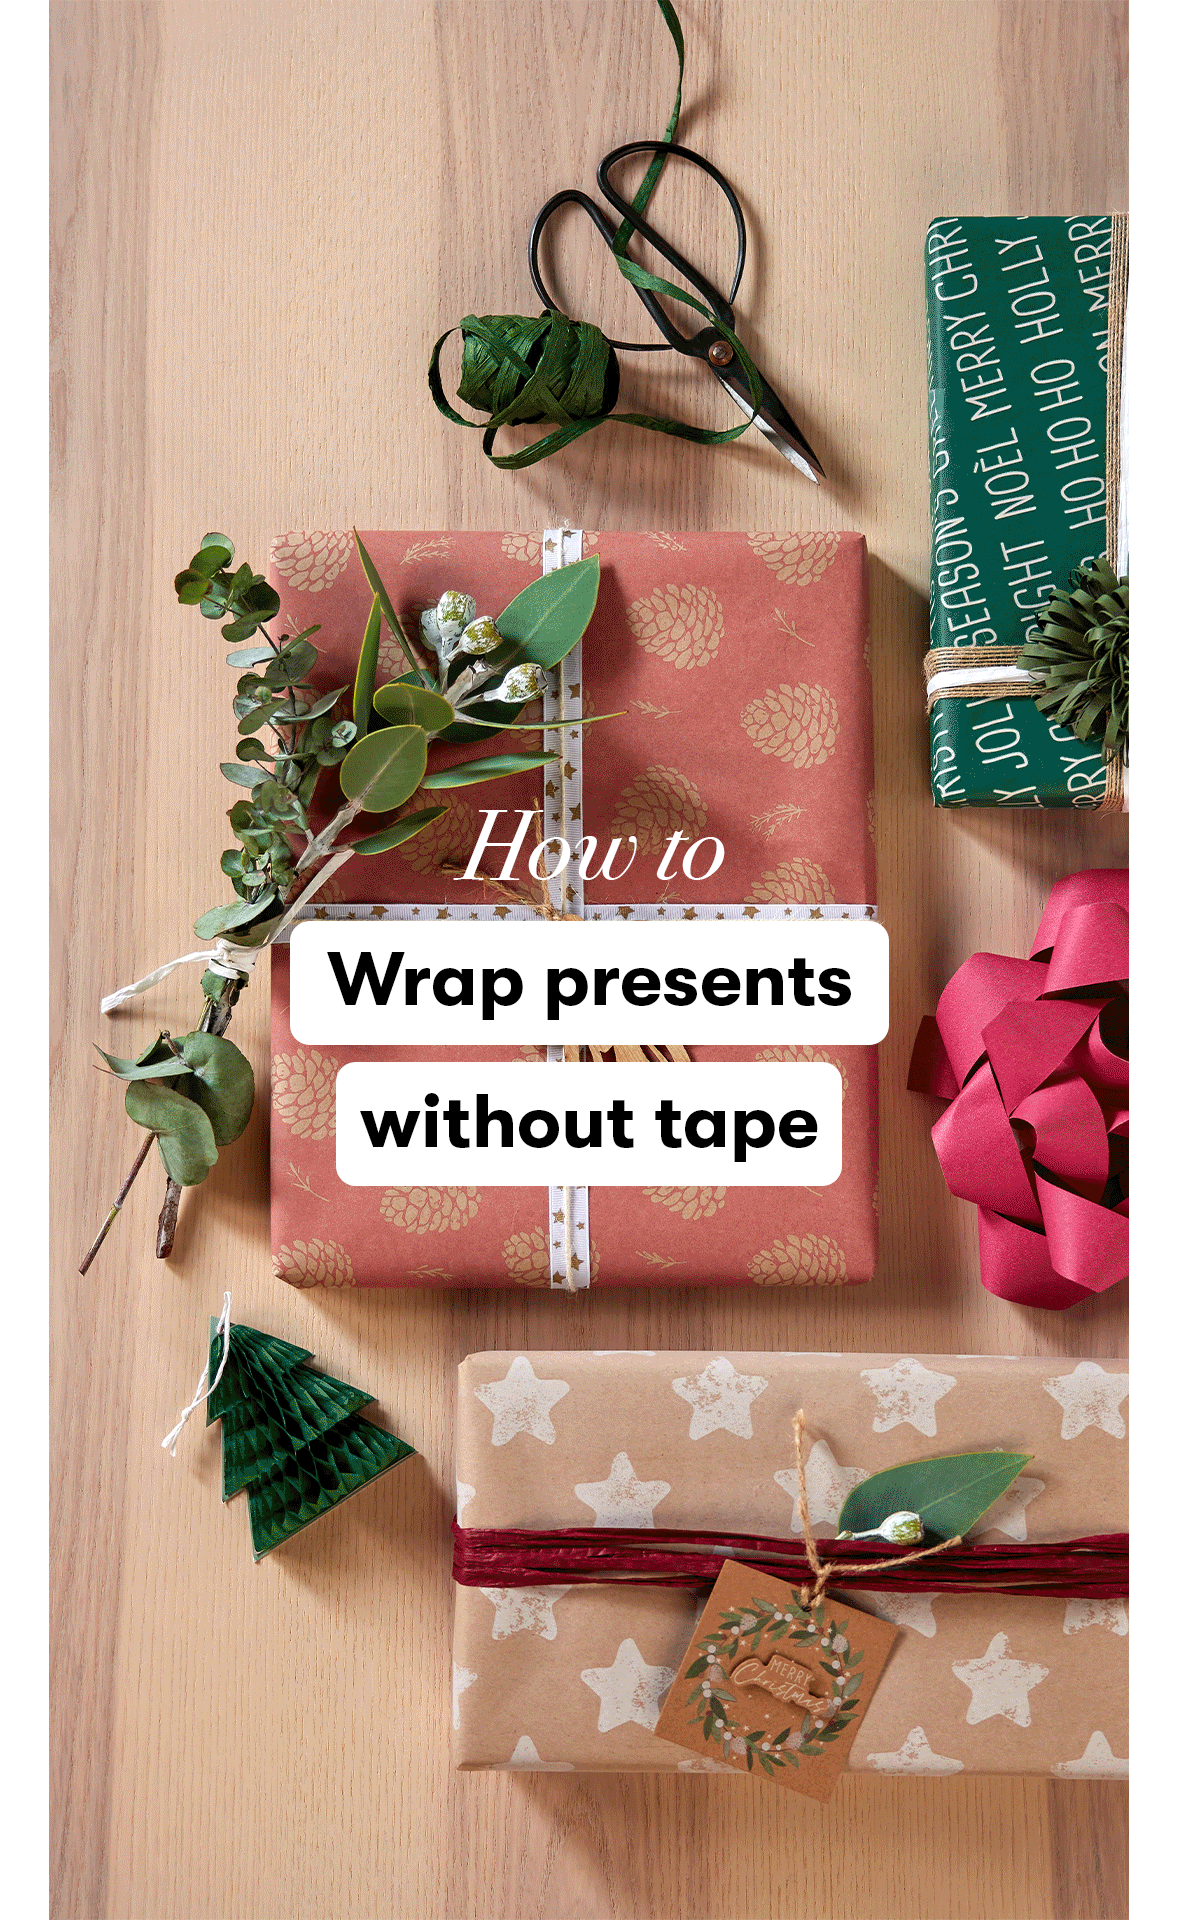 https://s7ap1.scene7.com/is/image/bigw/CAM_178852_ChristmasSeasonalDecorating_011023_Giftwrapping-1?$cms-max-image-threshold$&fmt=png-alpha&wid=1178&fit=hfit%2C1